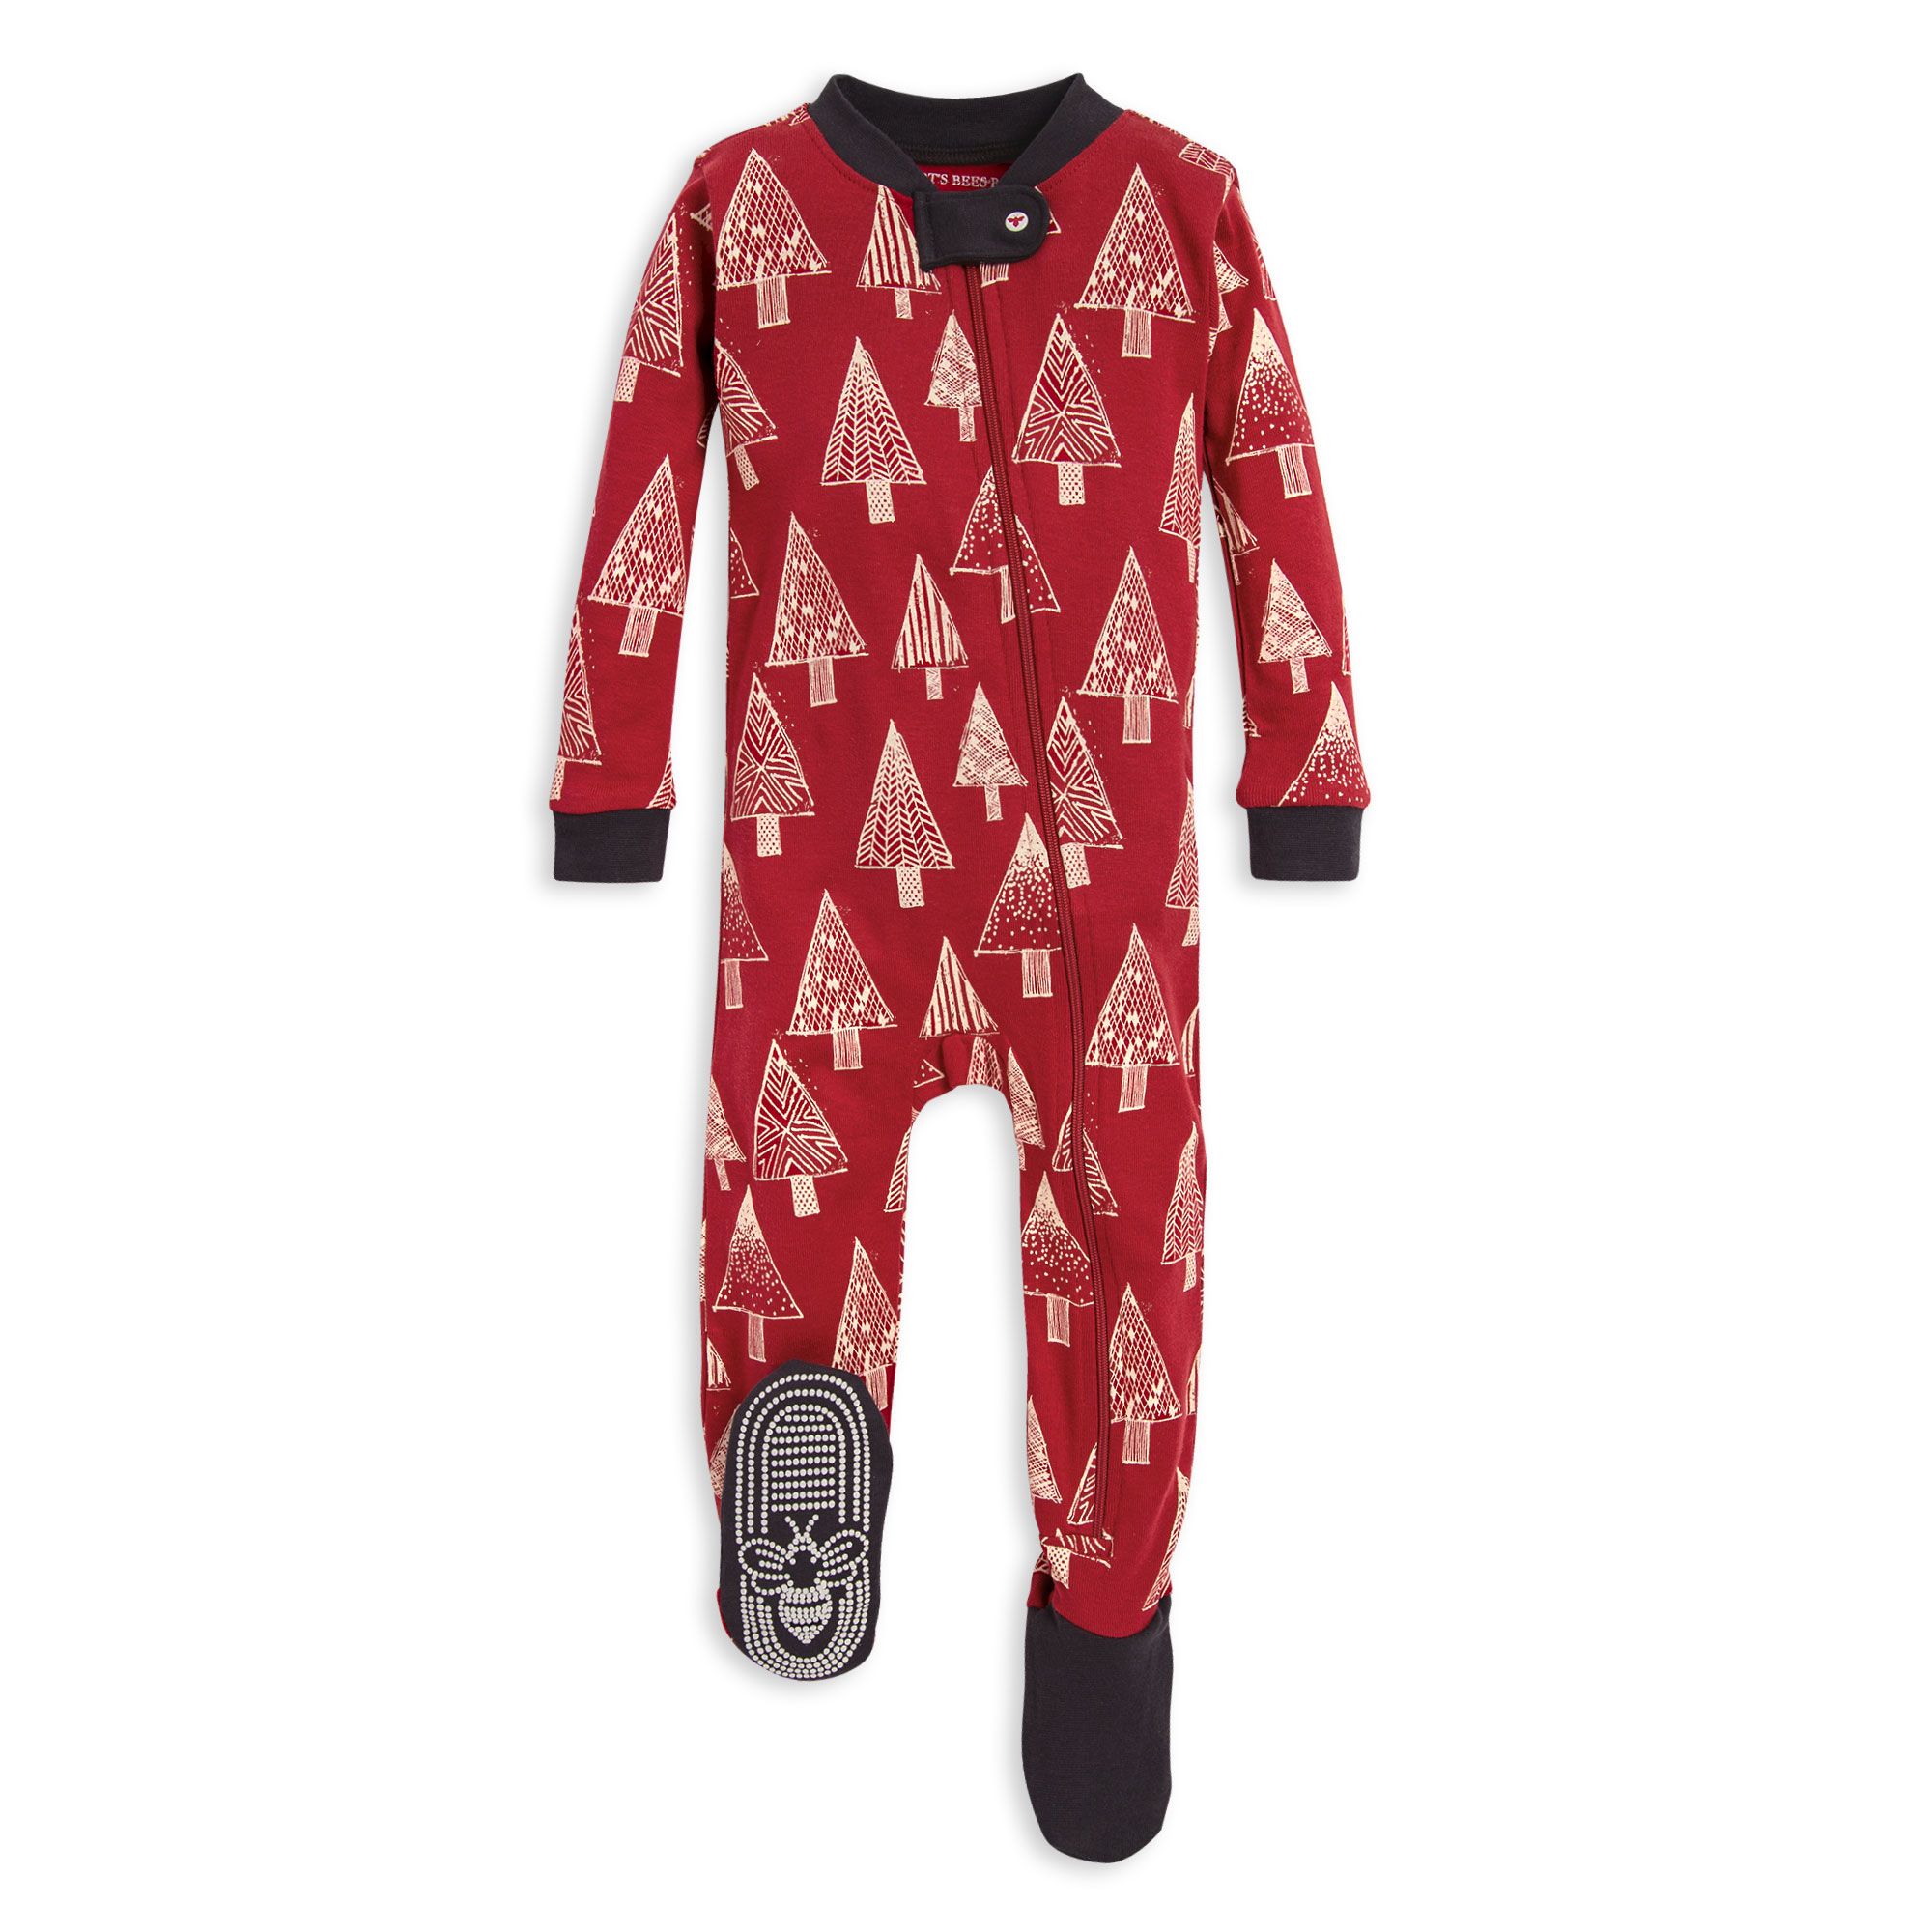 Burt's Bees Festive Forest Sleeper - Cranberry – Bloom Kids Collection